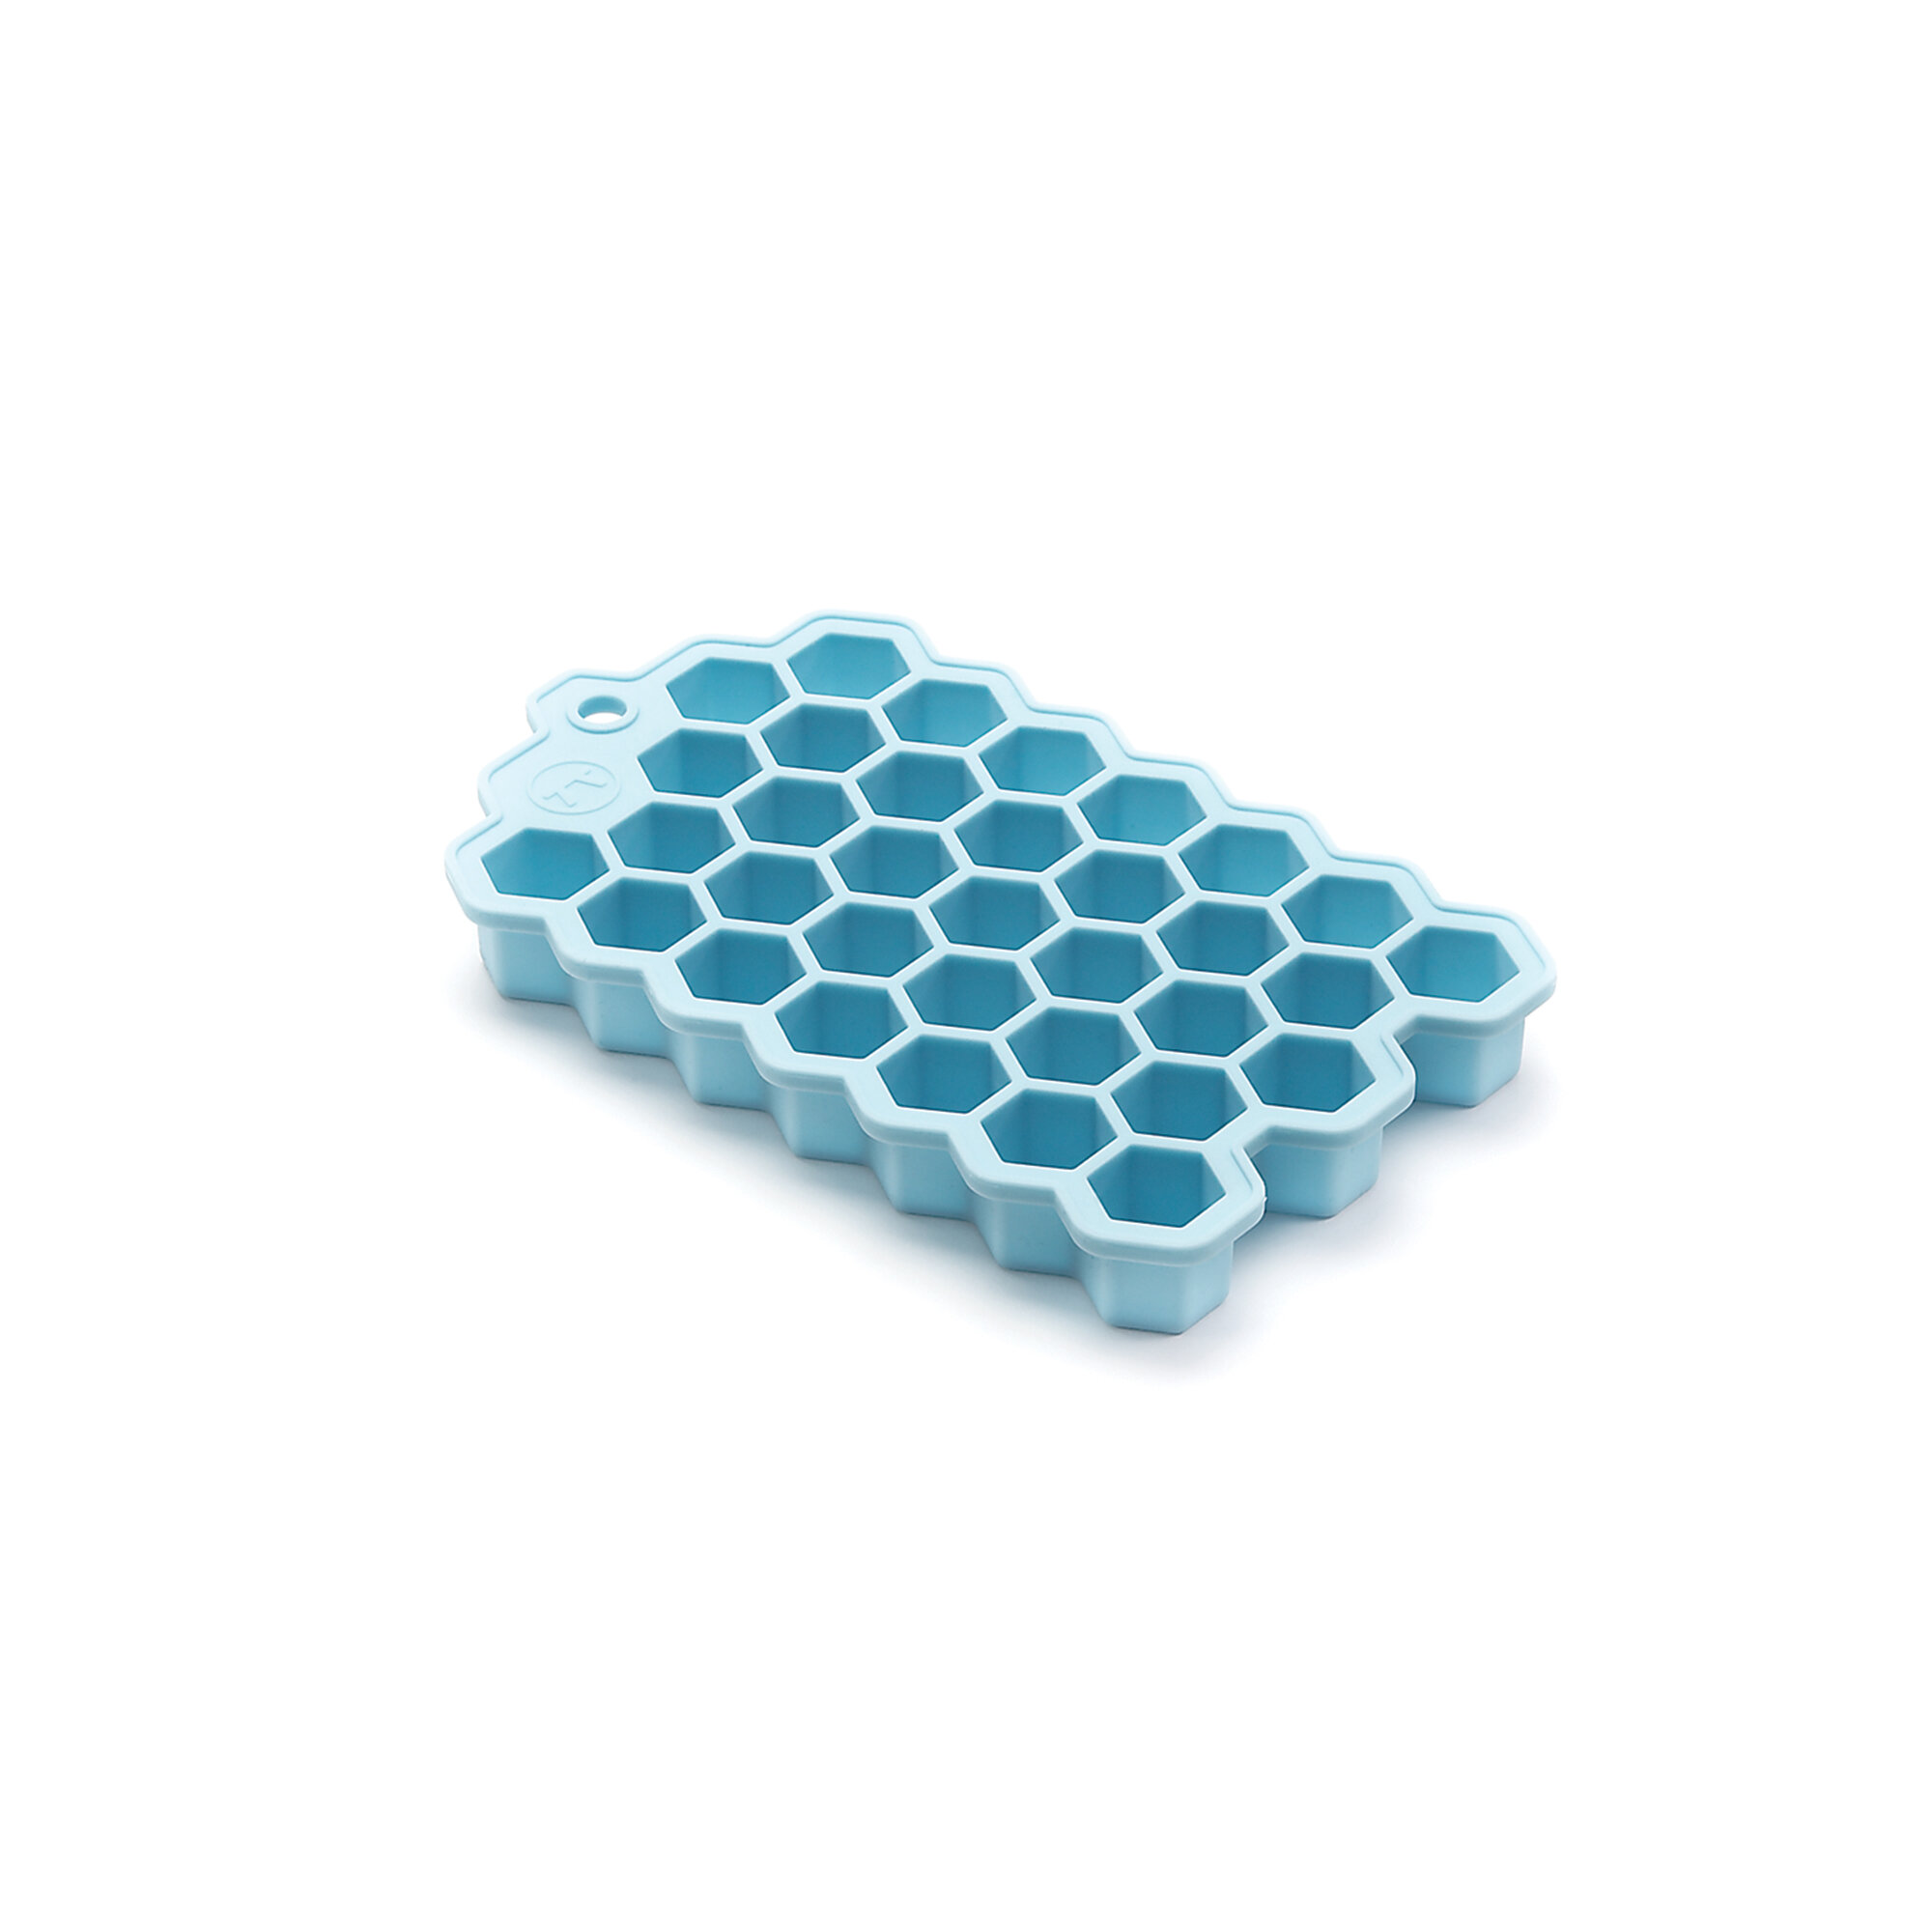 8 Cell Ice Cube Trays Silicone, Flexible and Easy Release Large